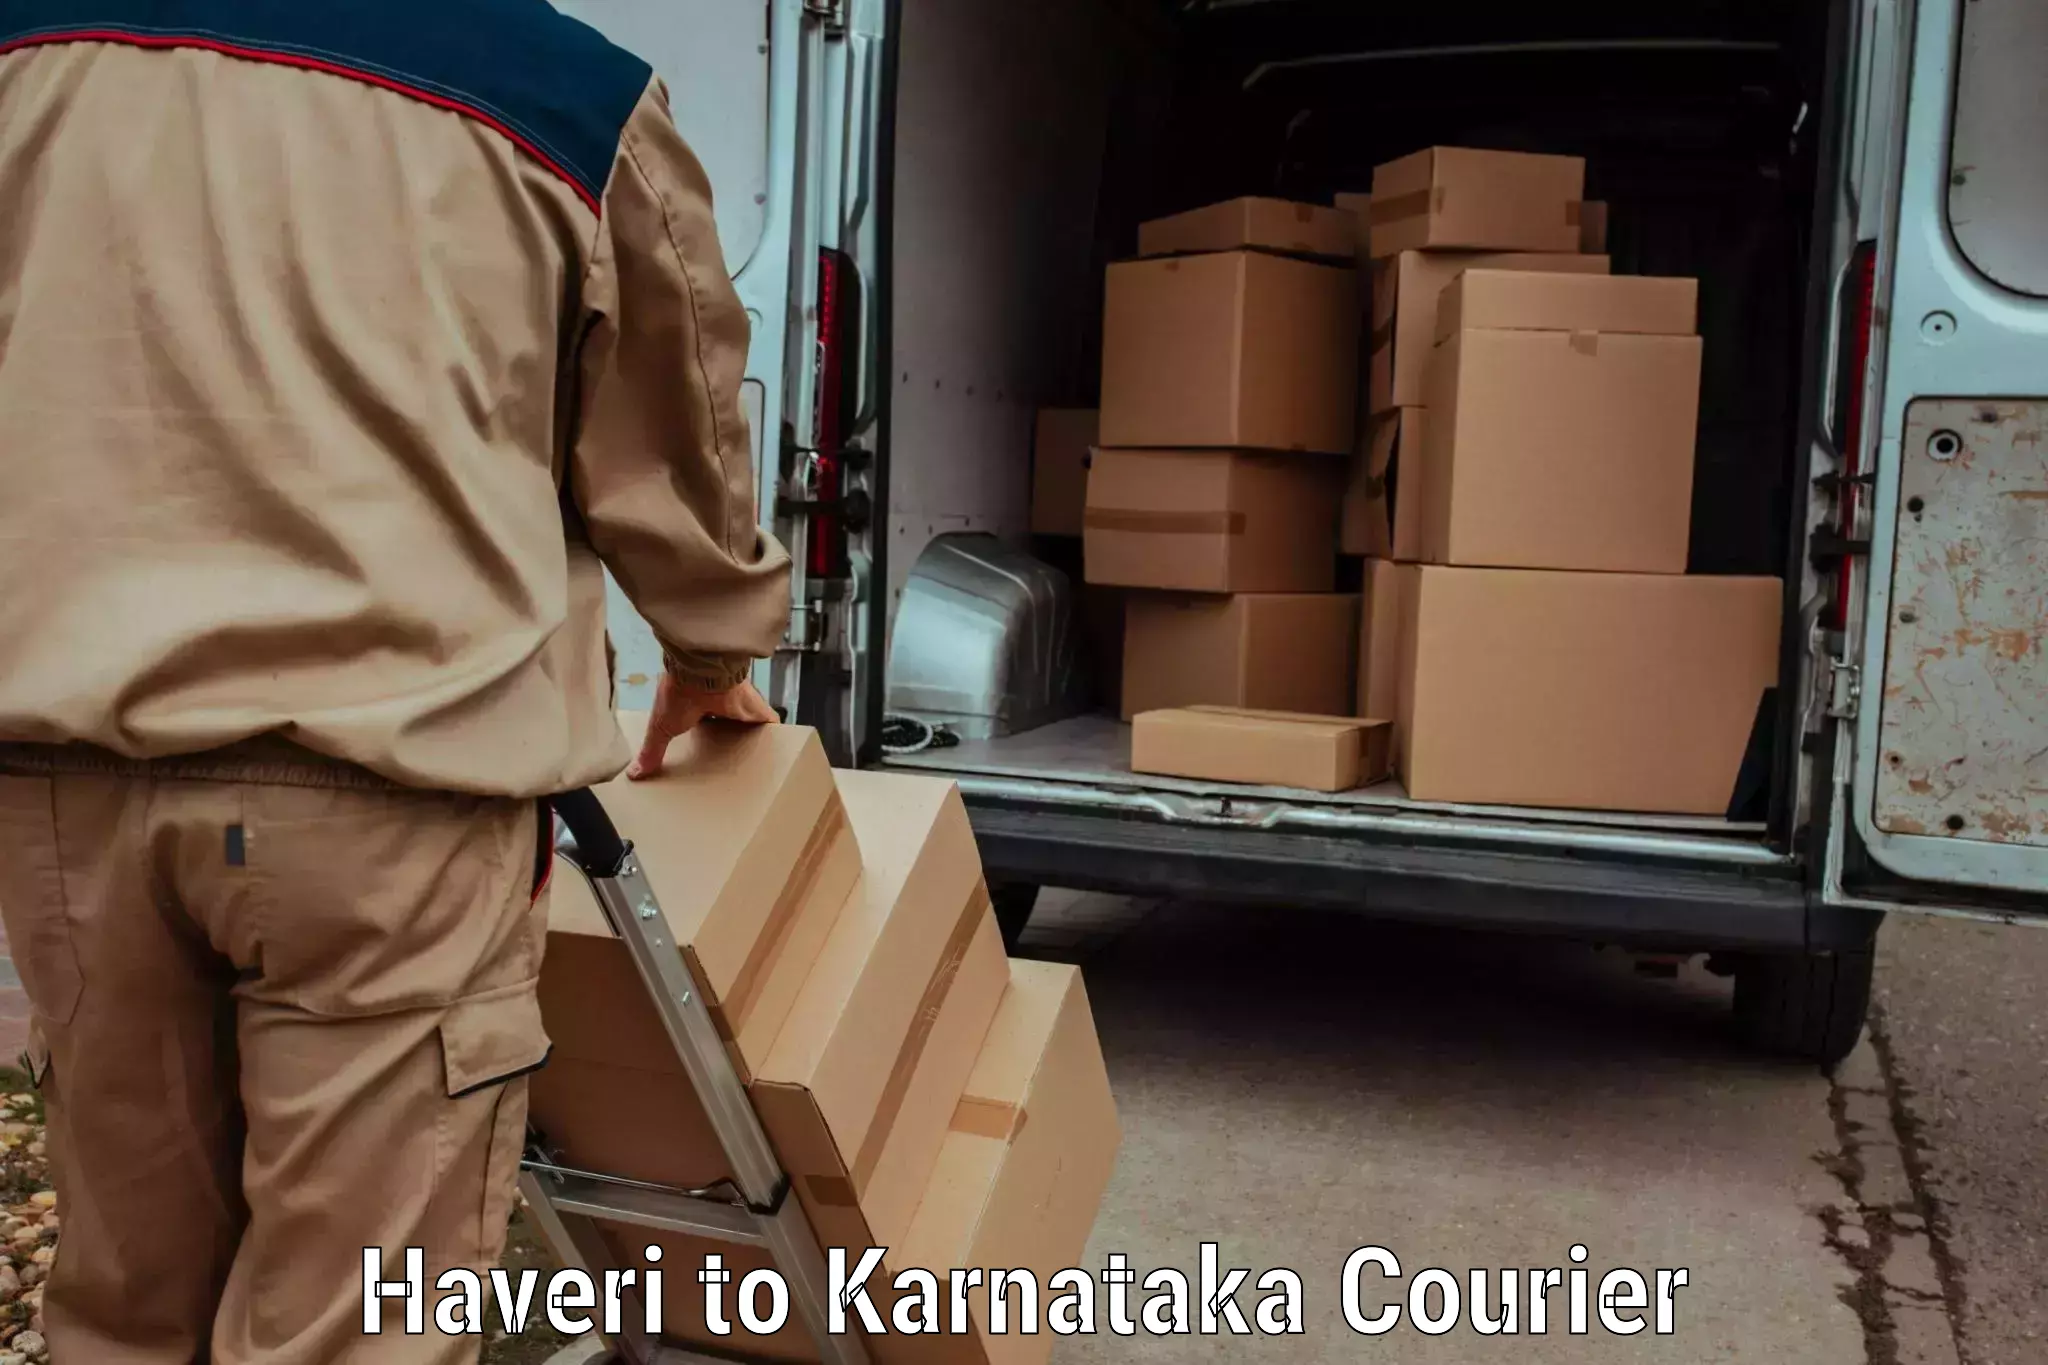 State-of-the-art courier technology Haveri to Eedu